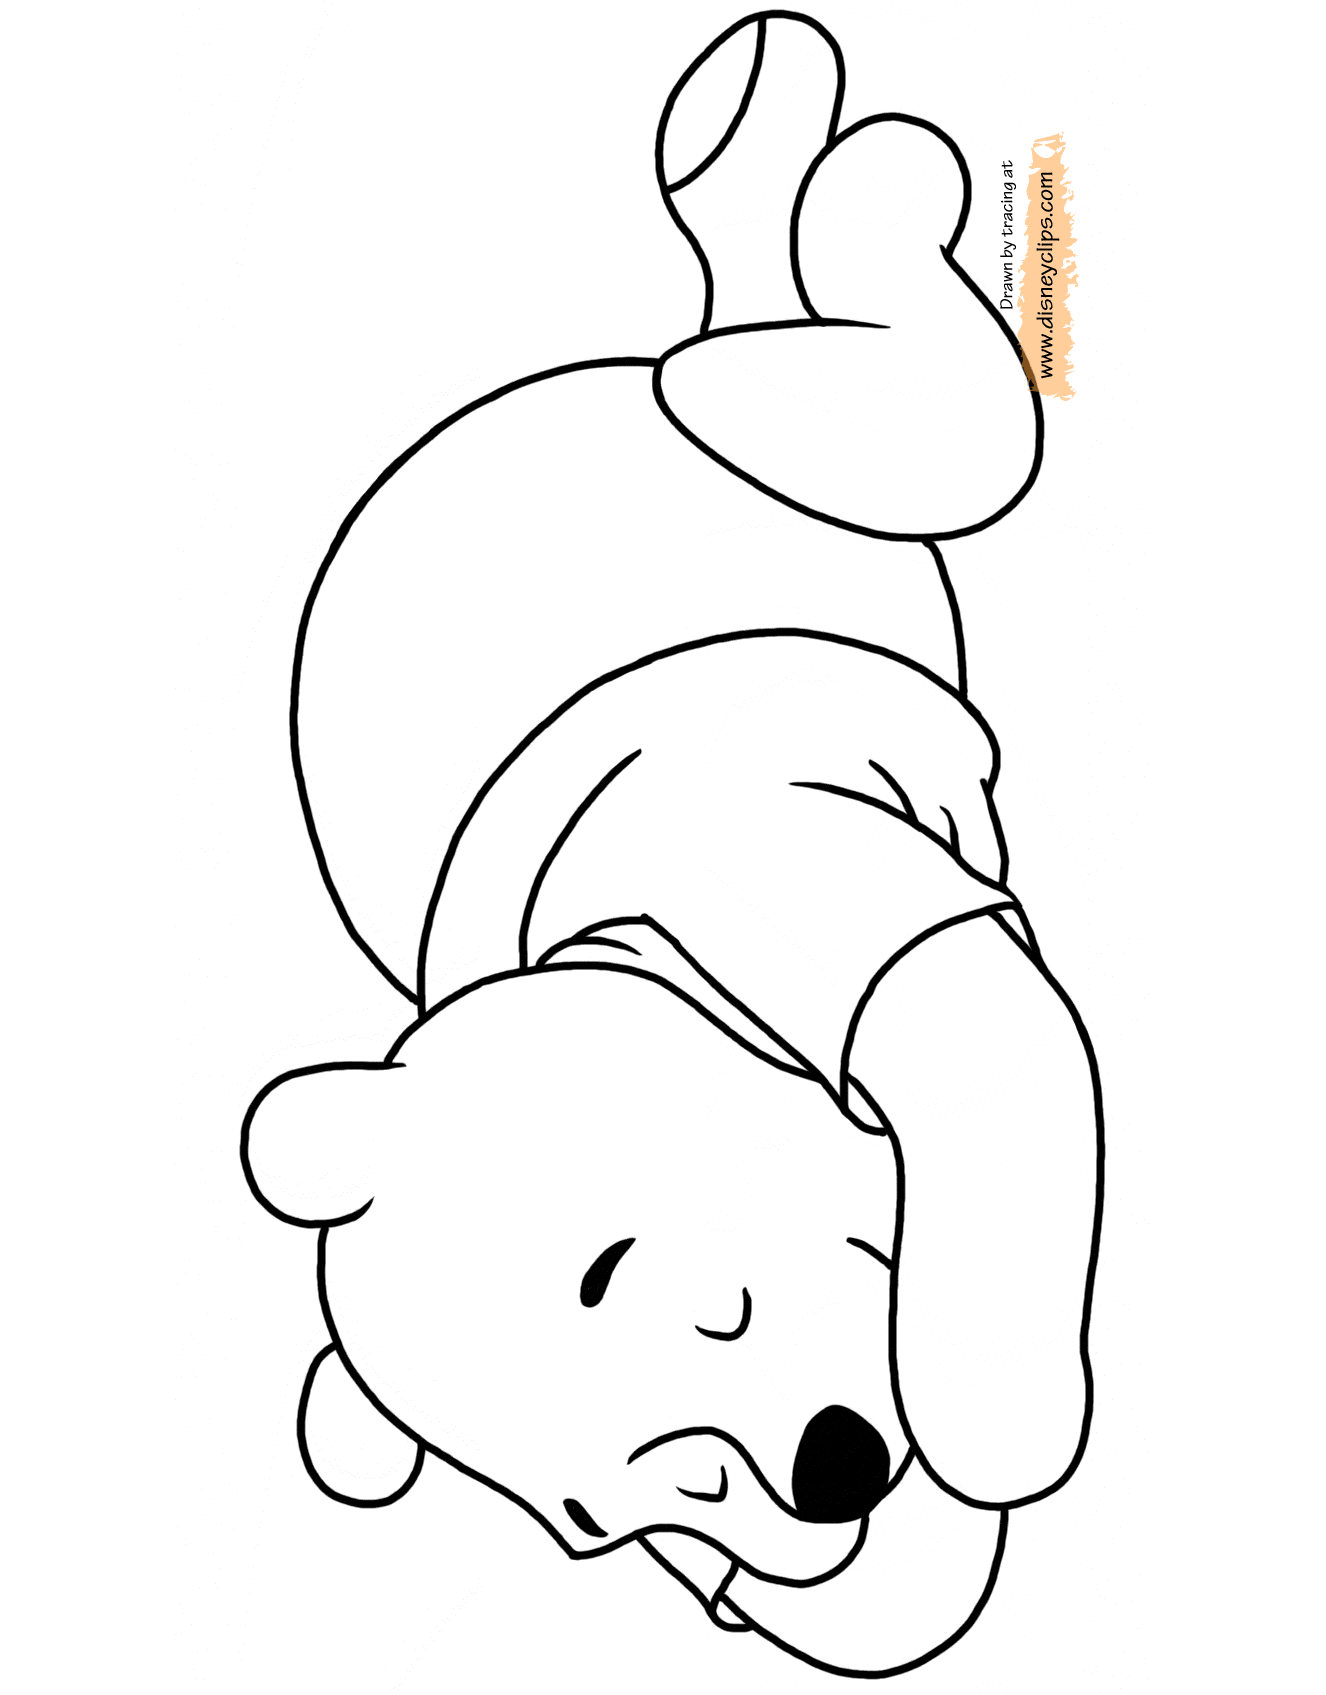 Download Winnie the Pooh Printable Coloring Pages 3 | Disney ...